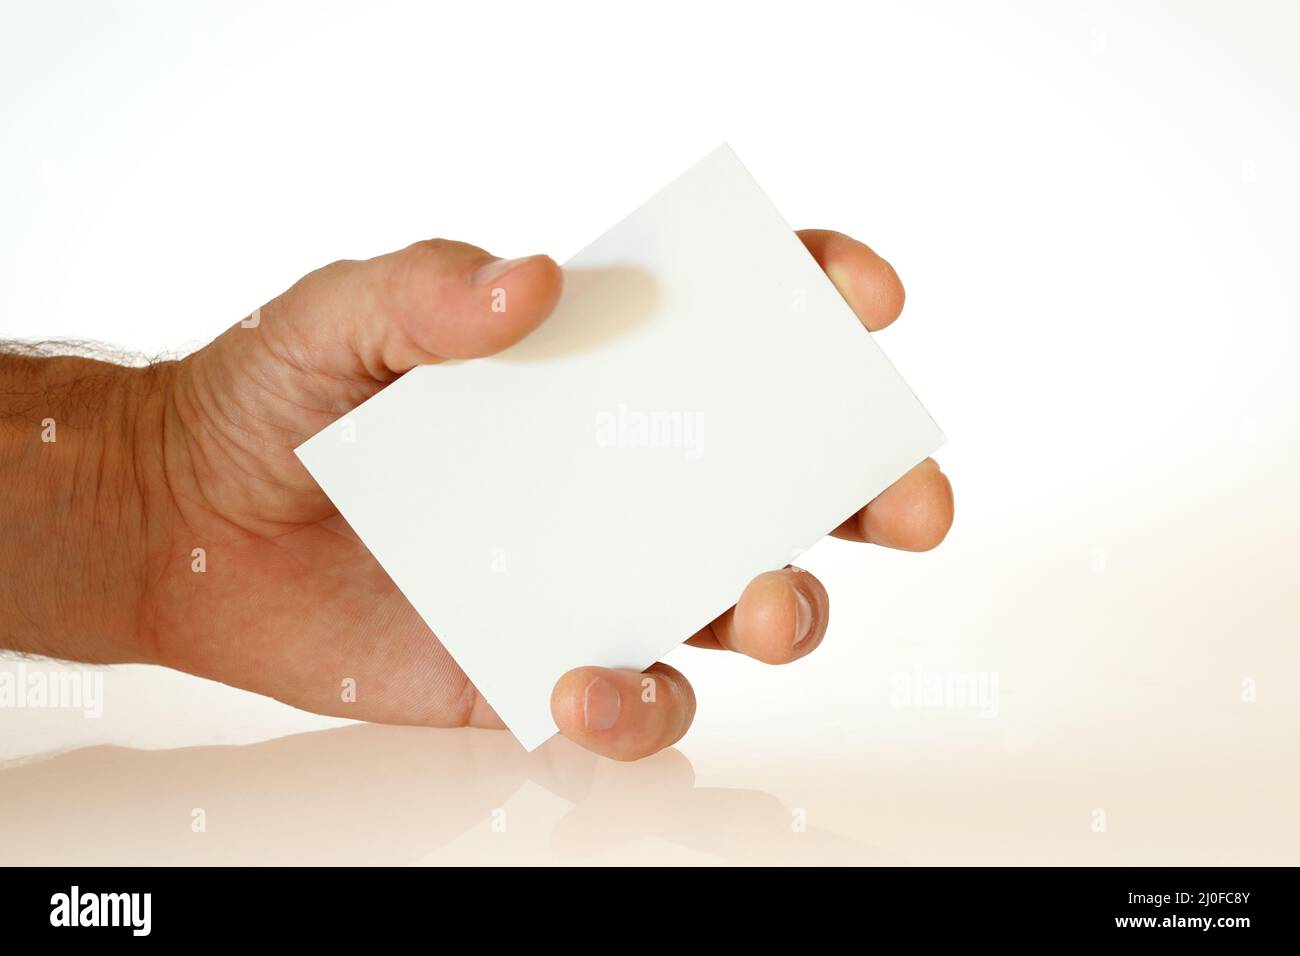 Hand with card Stock Photo